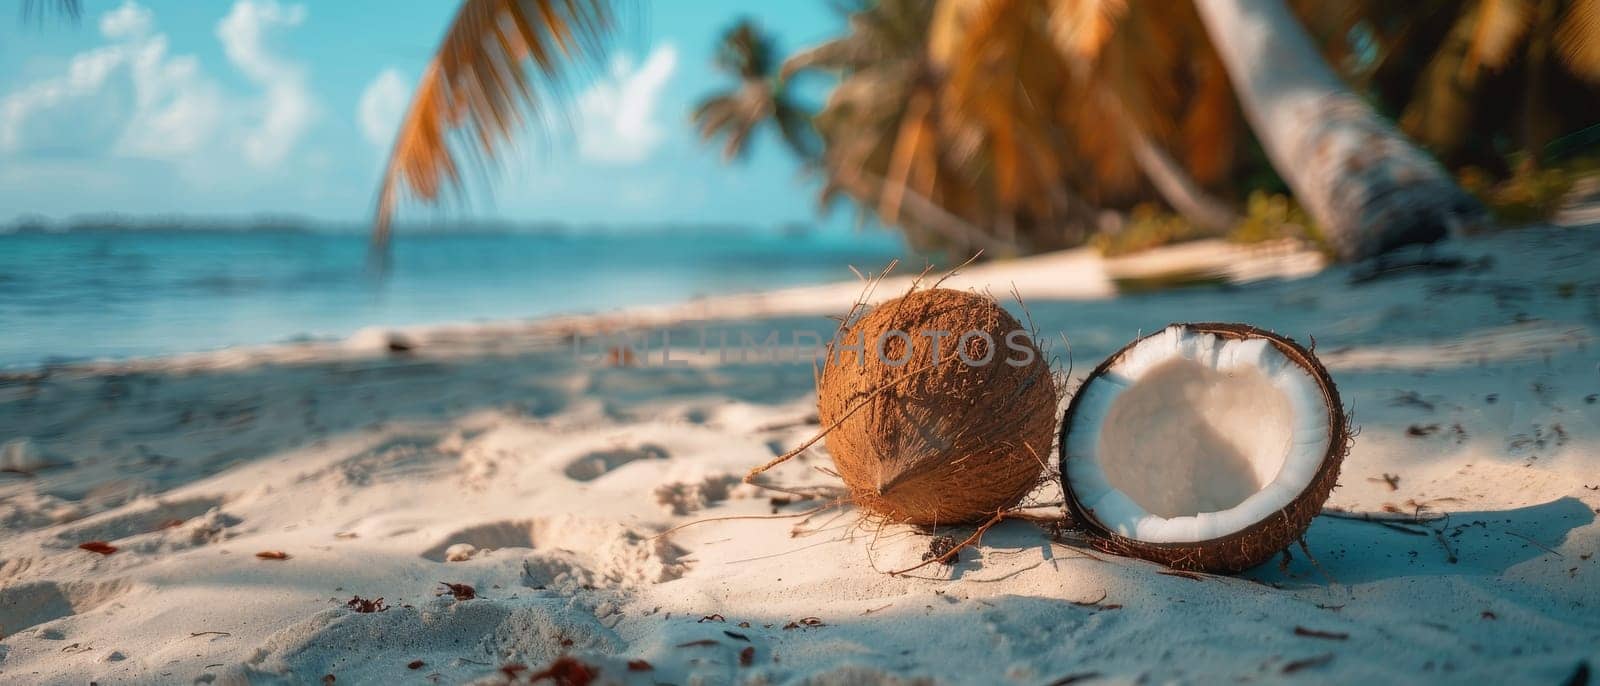 Three coconuts are on the beach, one of which is cut open by AI generated image.